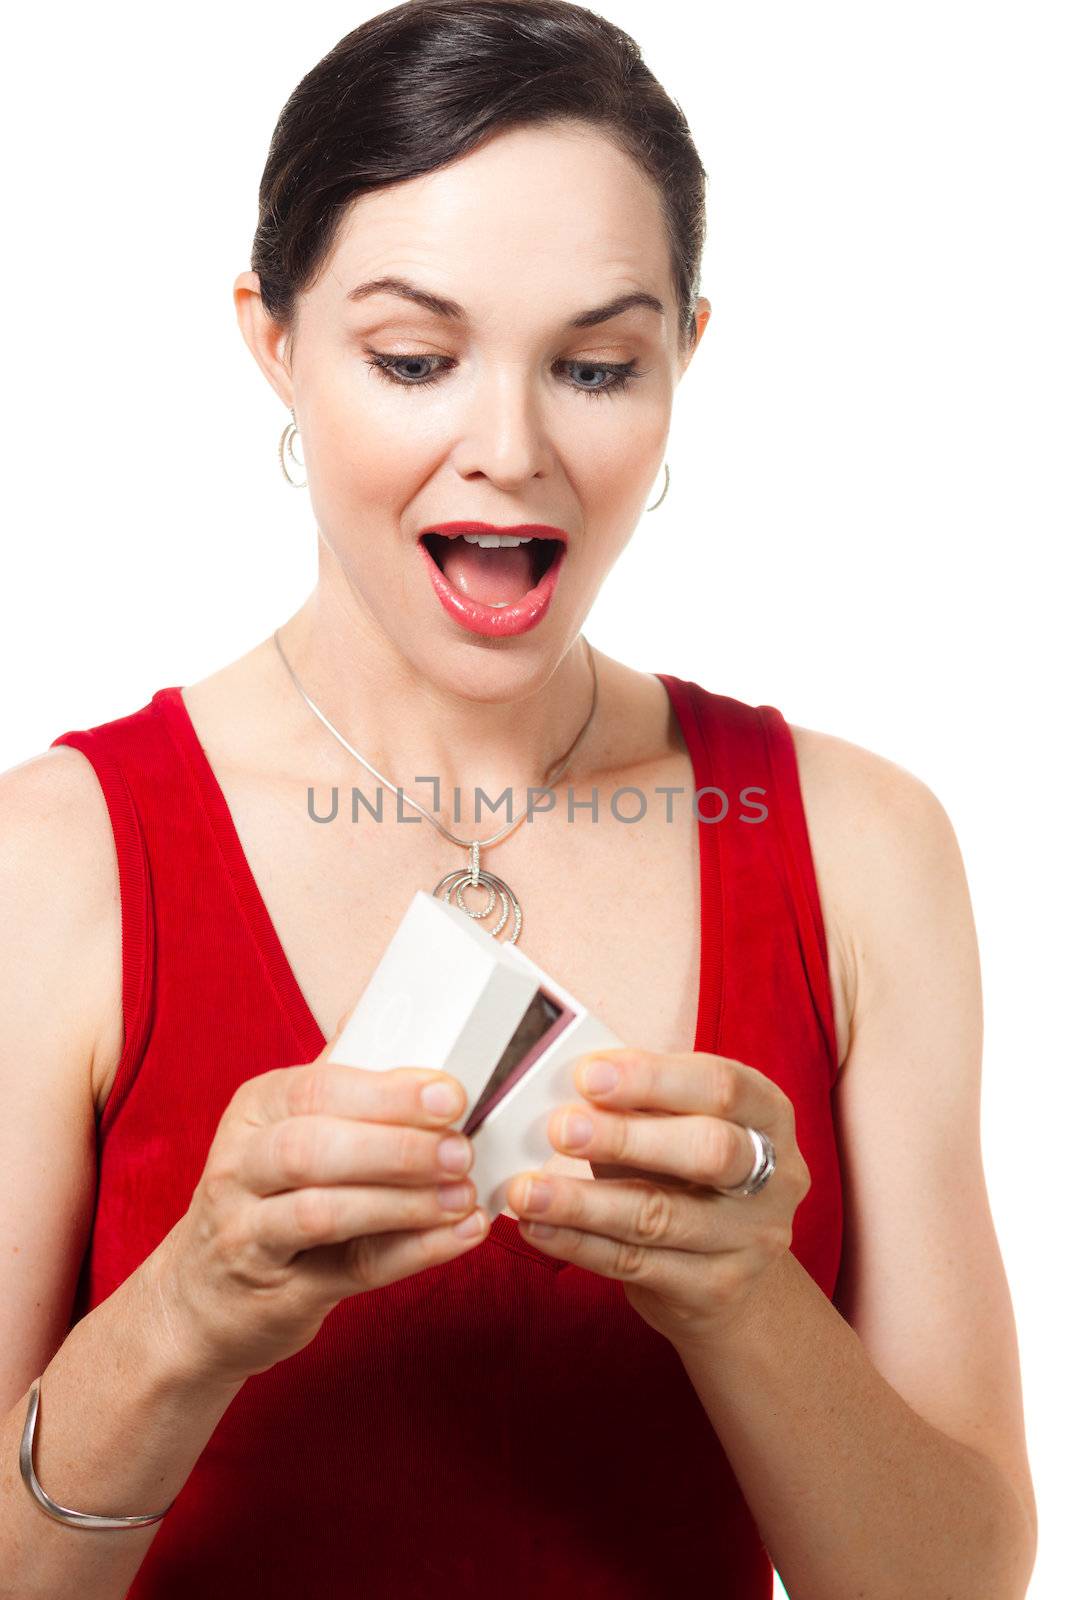 Surprised smiling beautiful woman holding an open jewelery gift box and looking at the present.